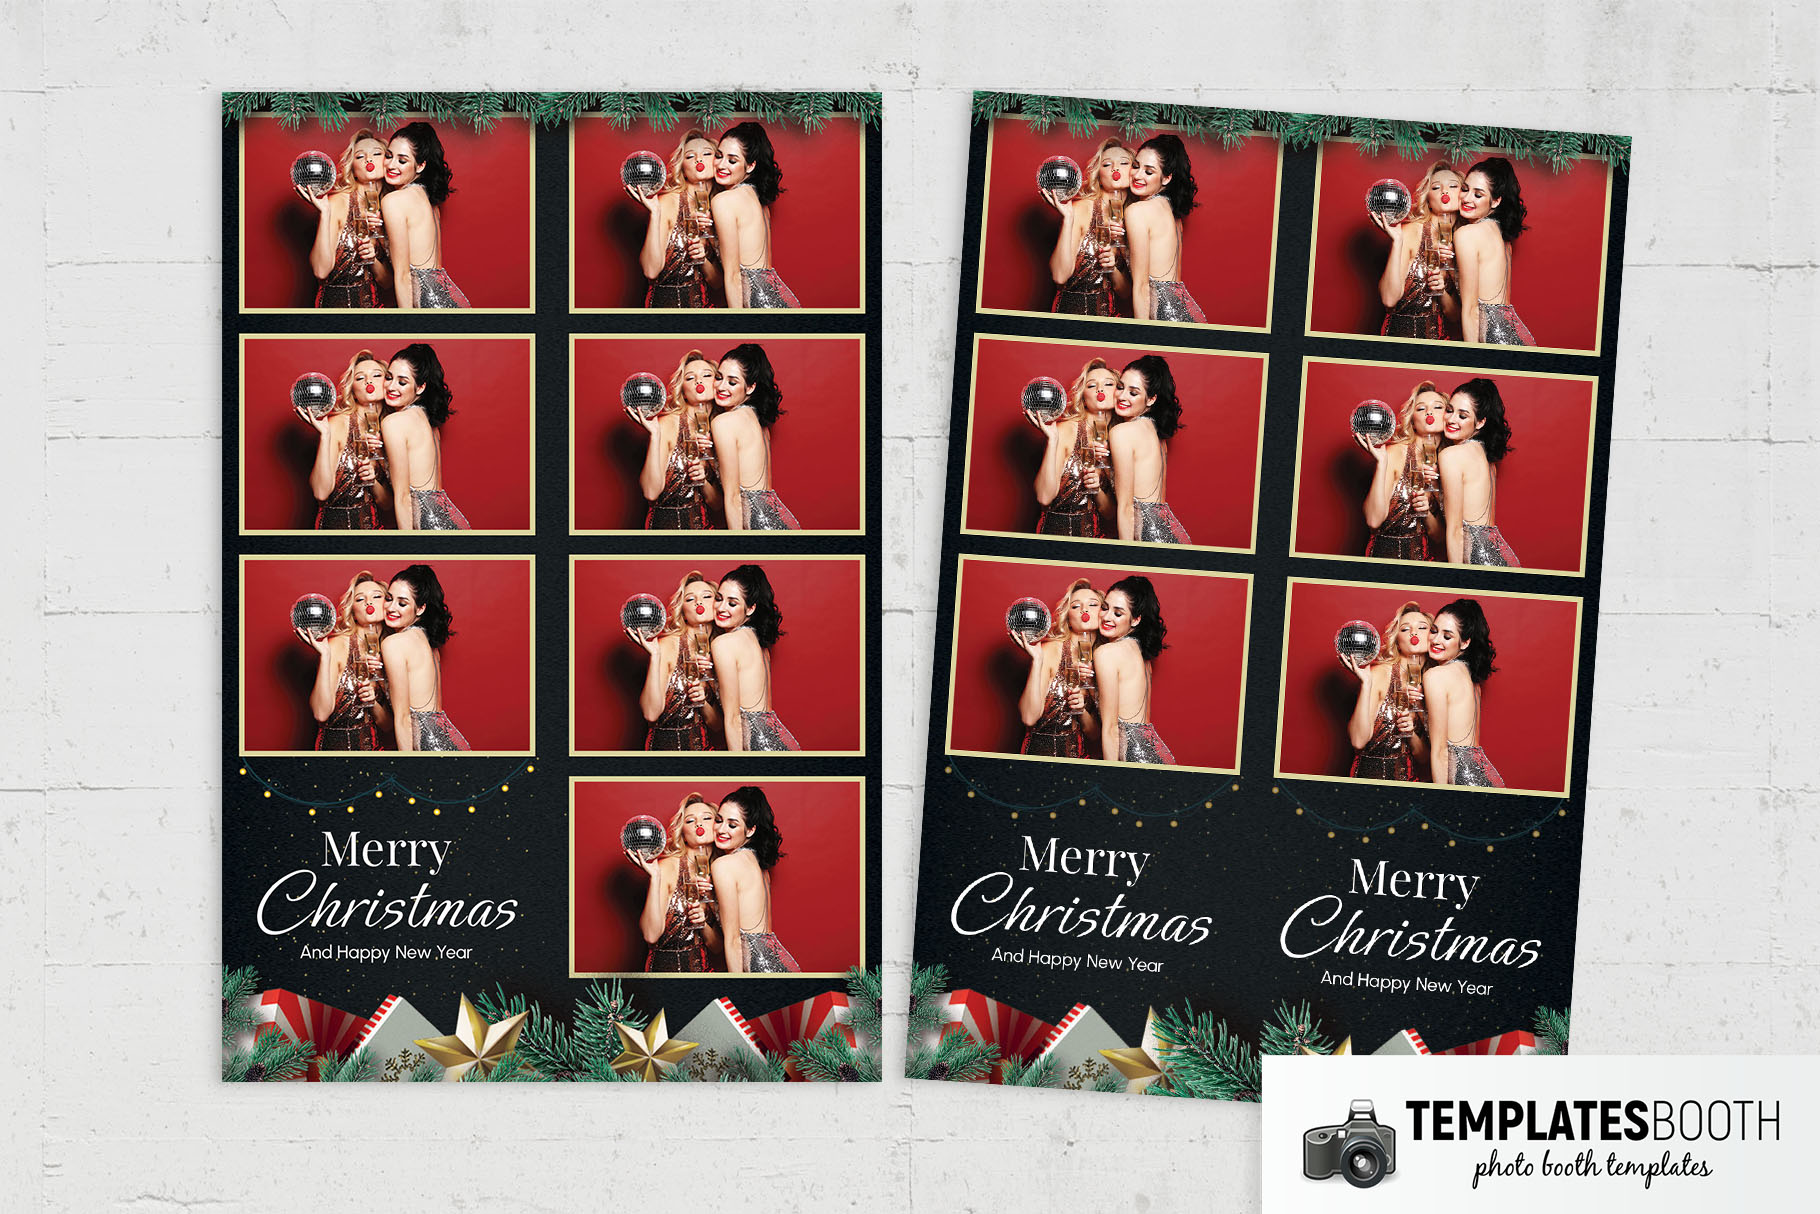 Free Festive Christmas Photo Booth Template